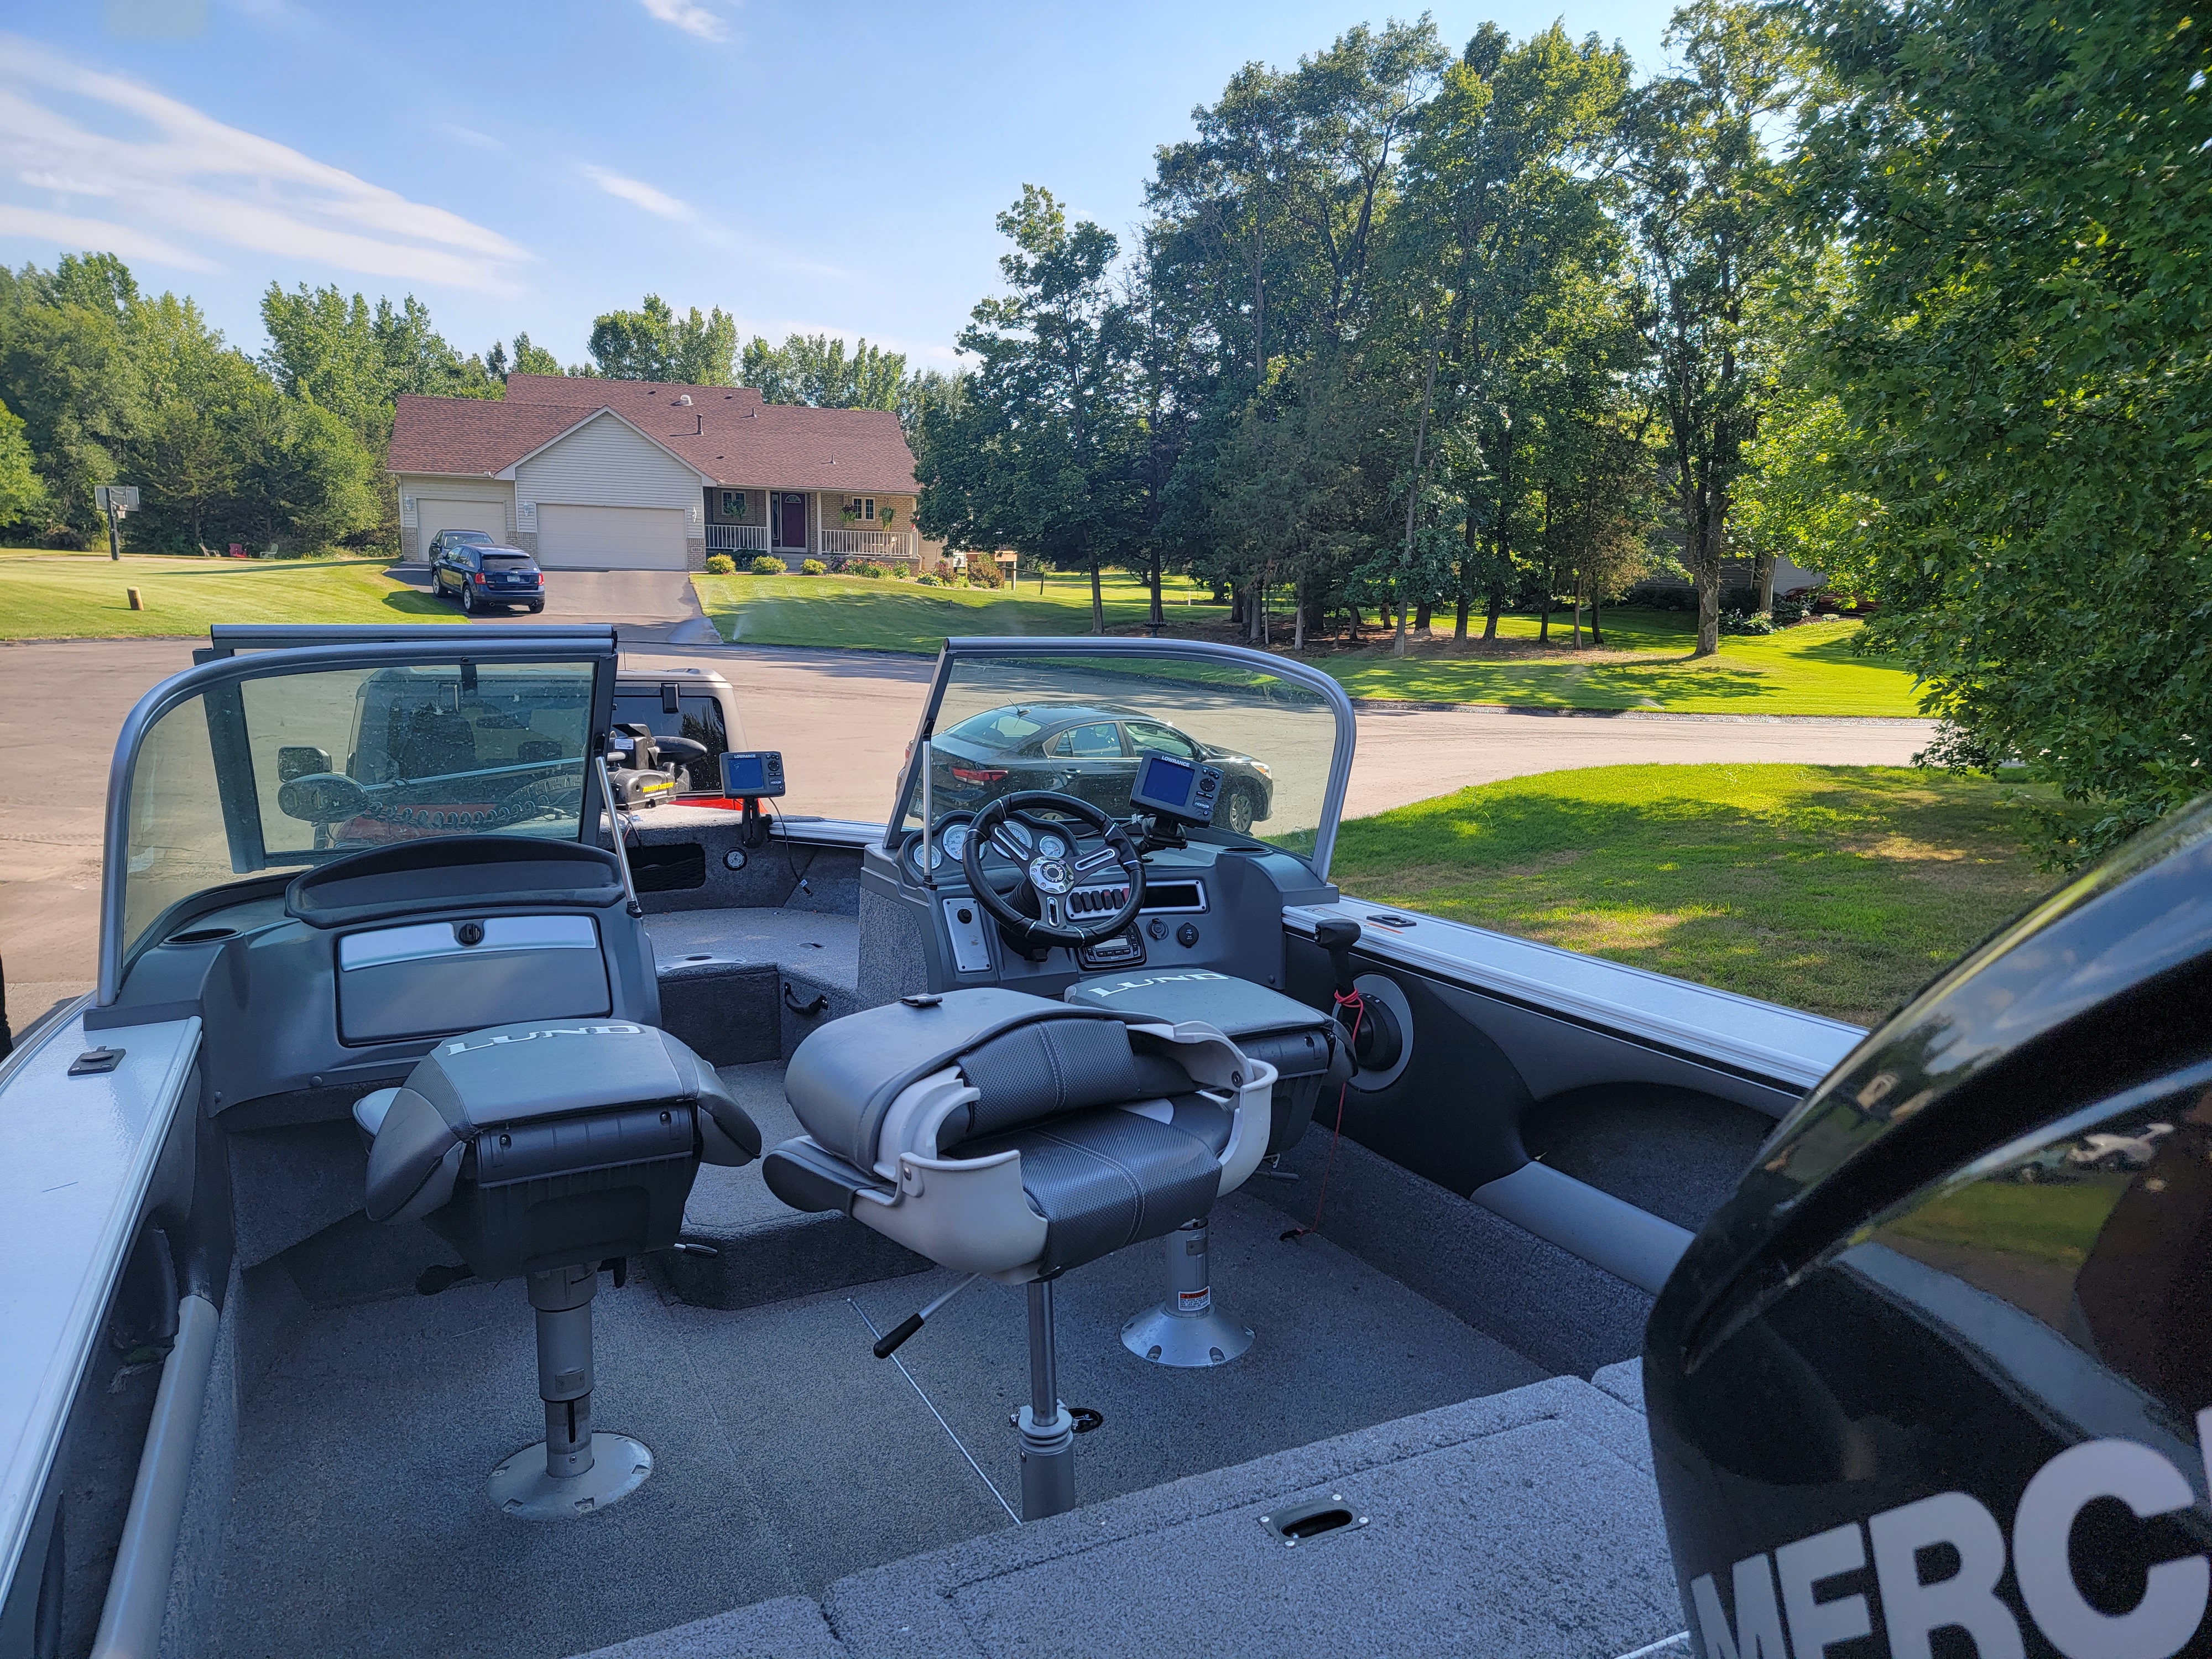 2017 Lund 1675 Crossover XS Fishing boat for sale in Anoka, MN - image 6 